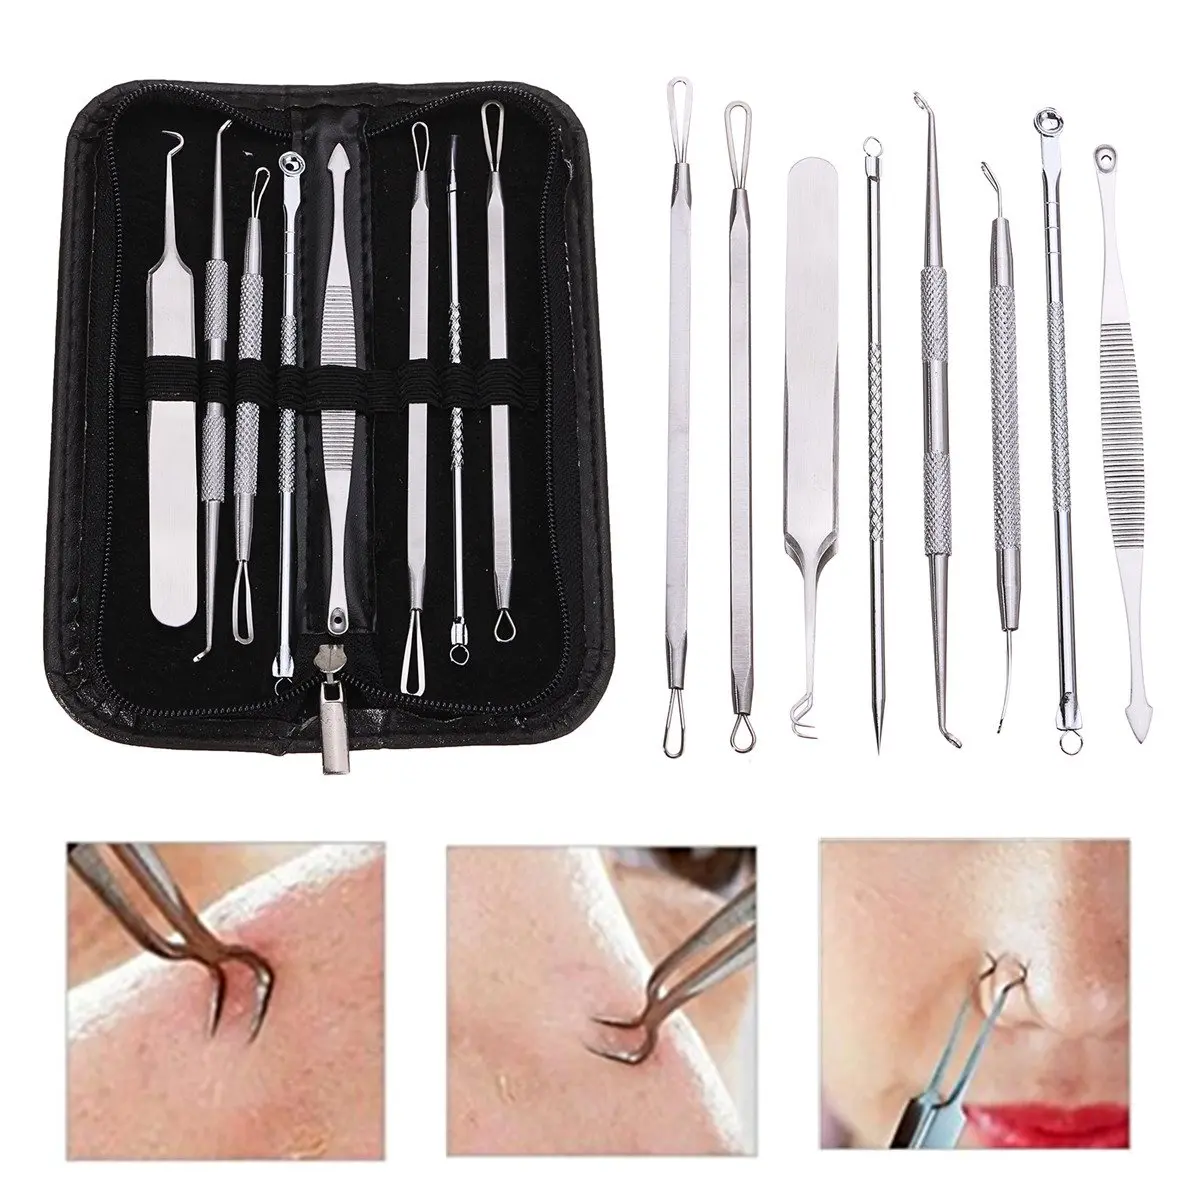 

8pcs Blackhead Remover Tool Kit Stainless Steel Pimple Acne Comedone Needle Tweezer Blemish Whitehead Extractor Face Skin Care